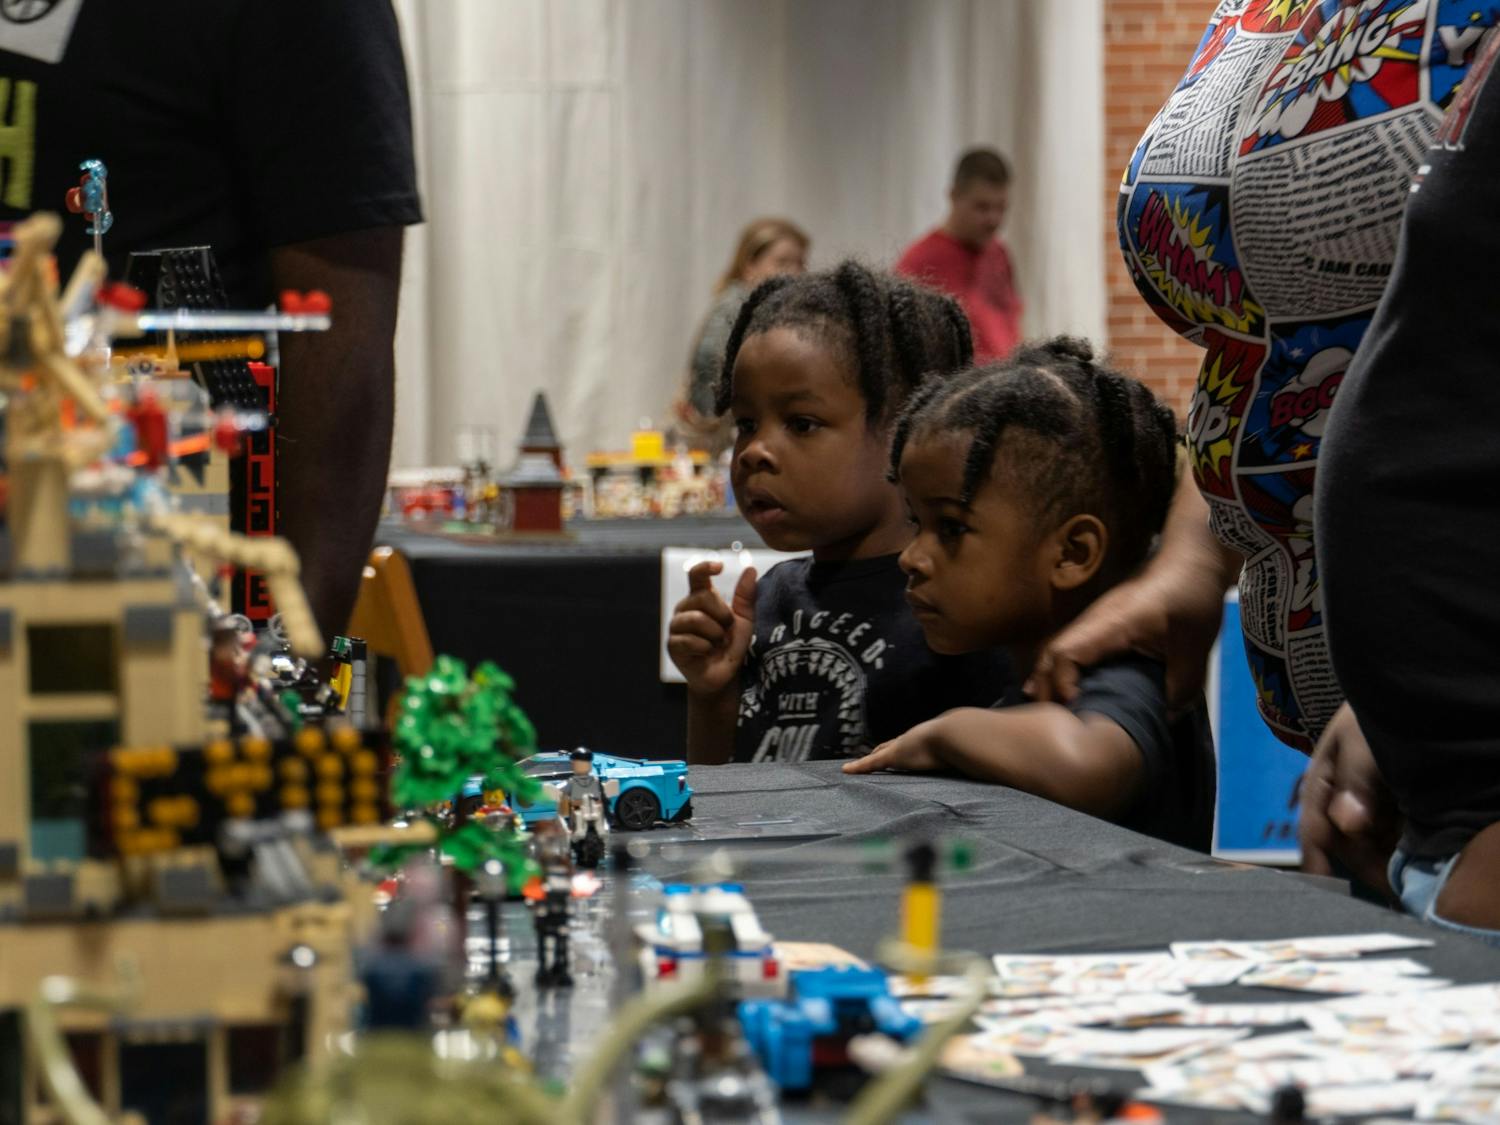 Columbia residents gather for the SC inaugural Columbia Brick Con; a Lego centered charity event held by SC Bricks on April 2, 2022. SC Bricks, a SC adult Lego fan group, showcased and sold Lego creations to help raise money for the Epworth's Children's Home. &nbsp;